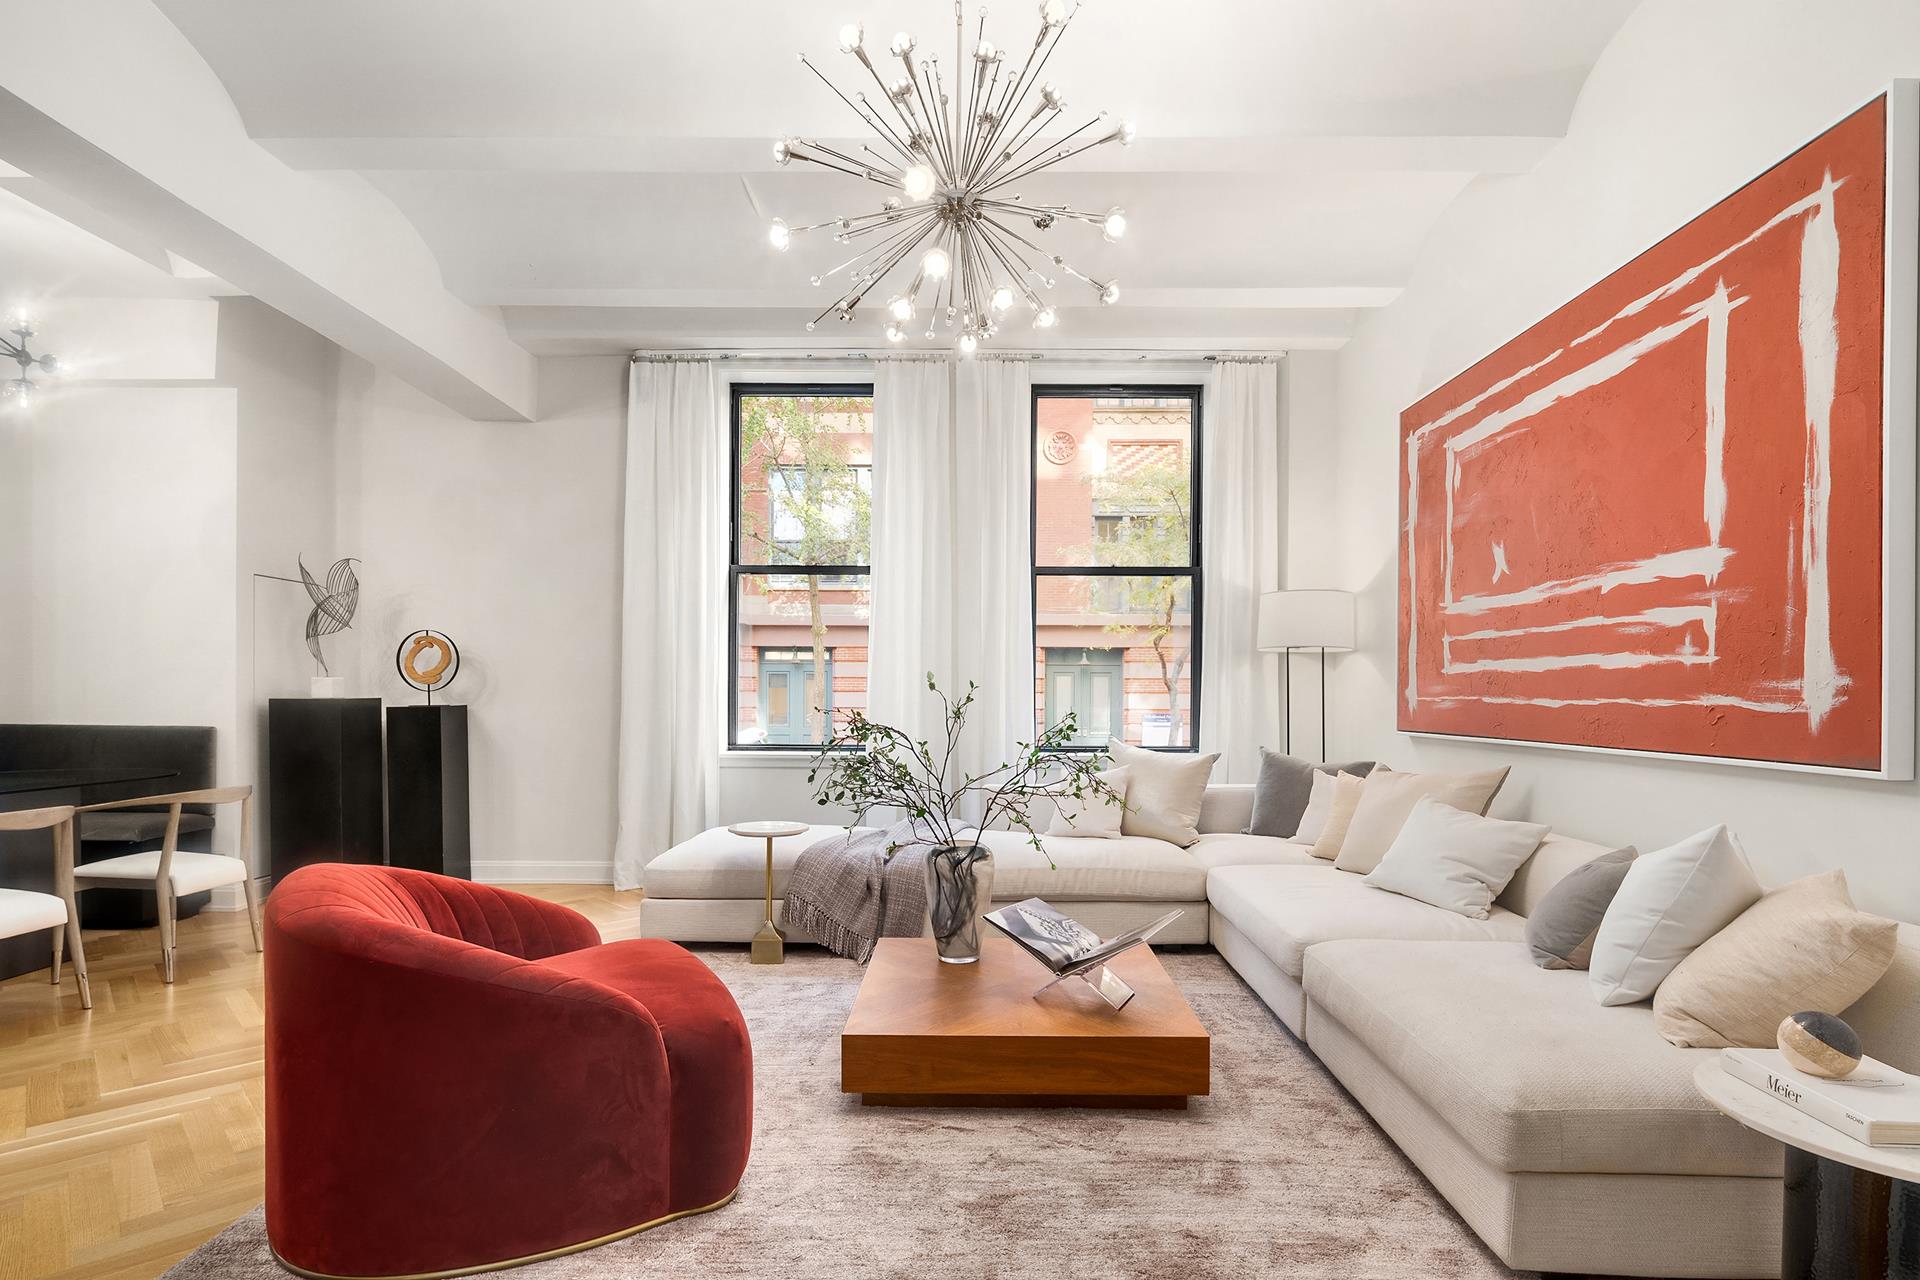 275 West 10th Street Maisb, West Village, Downtown, NYC - 2 Bedrooms  
2.5 Bathrooms  
4 Rooms - 